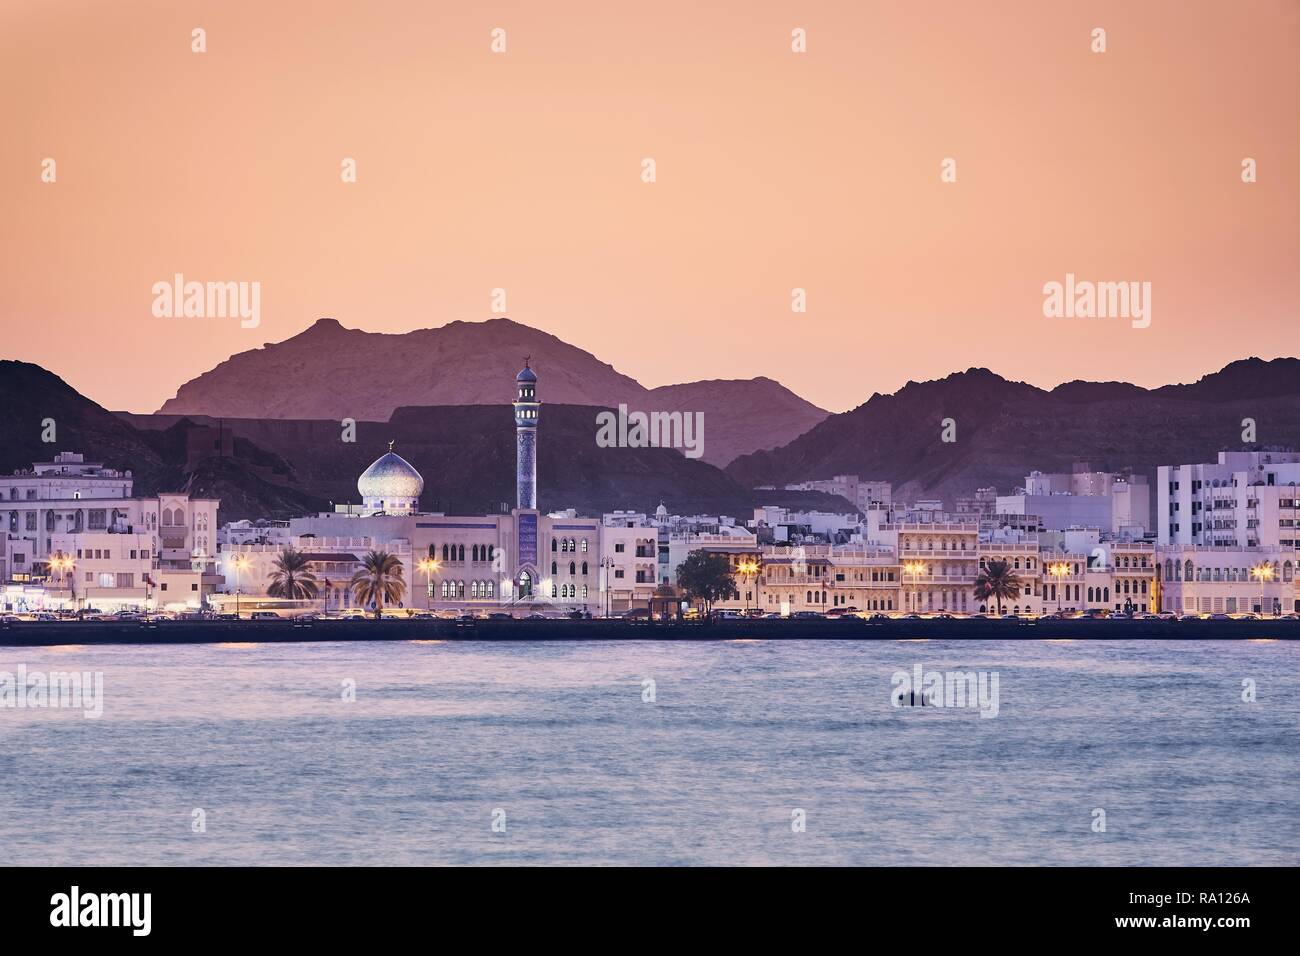 Cityscape view of Muscat city at golden sunset. The capital of Oman. Stock Photo